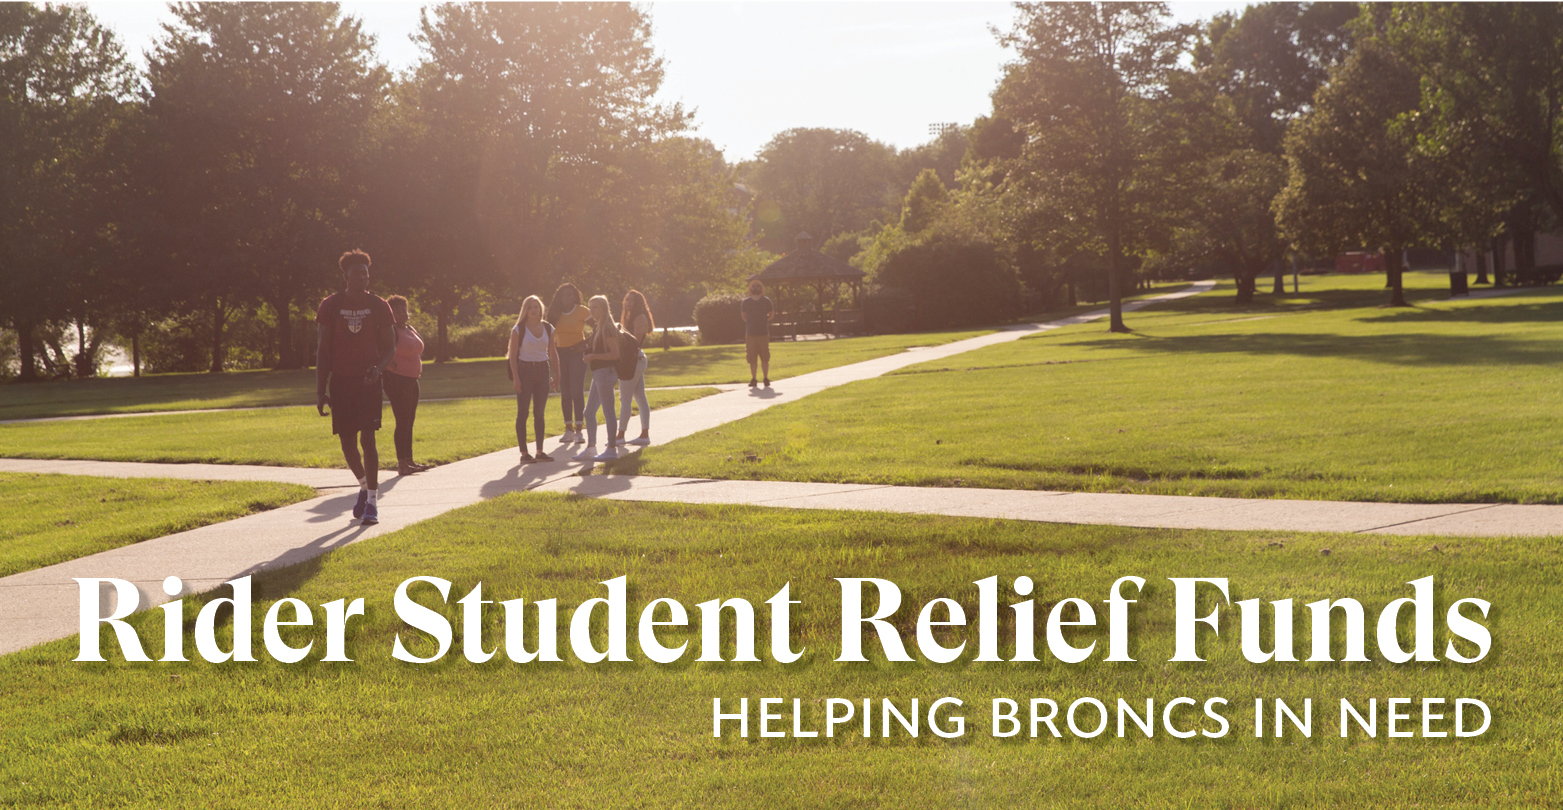 Helping Broncs in Need